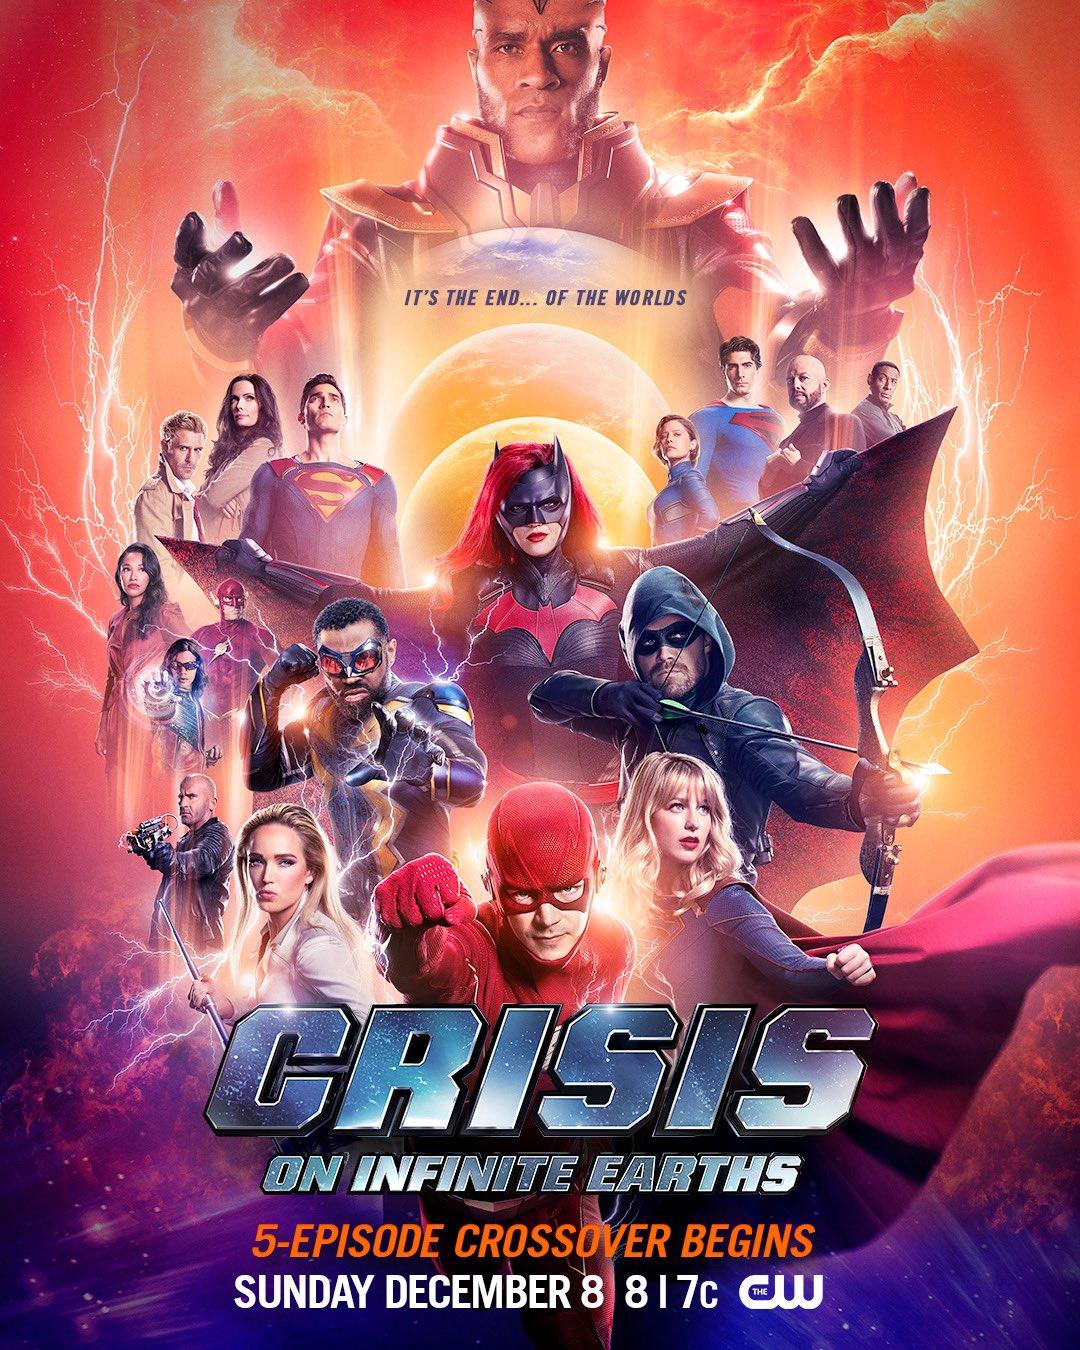 First Crisis on Infinite Earths Poster Teases Epic DC Superhero